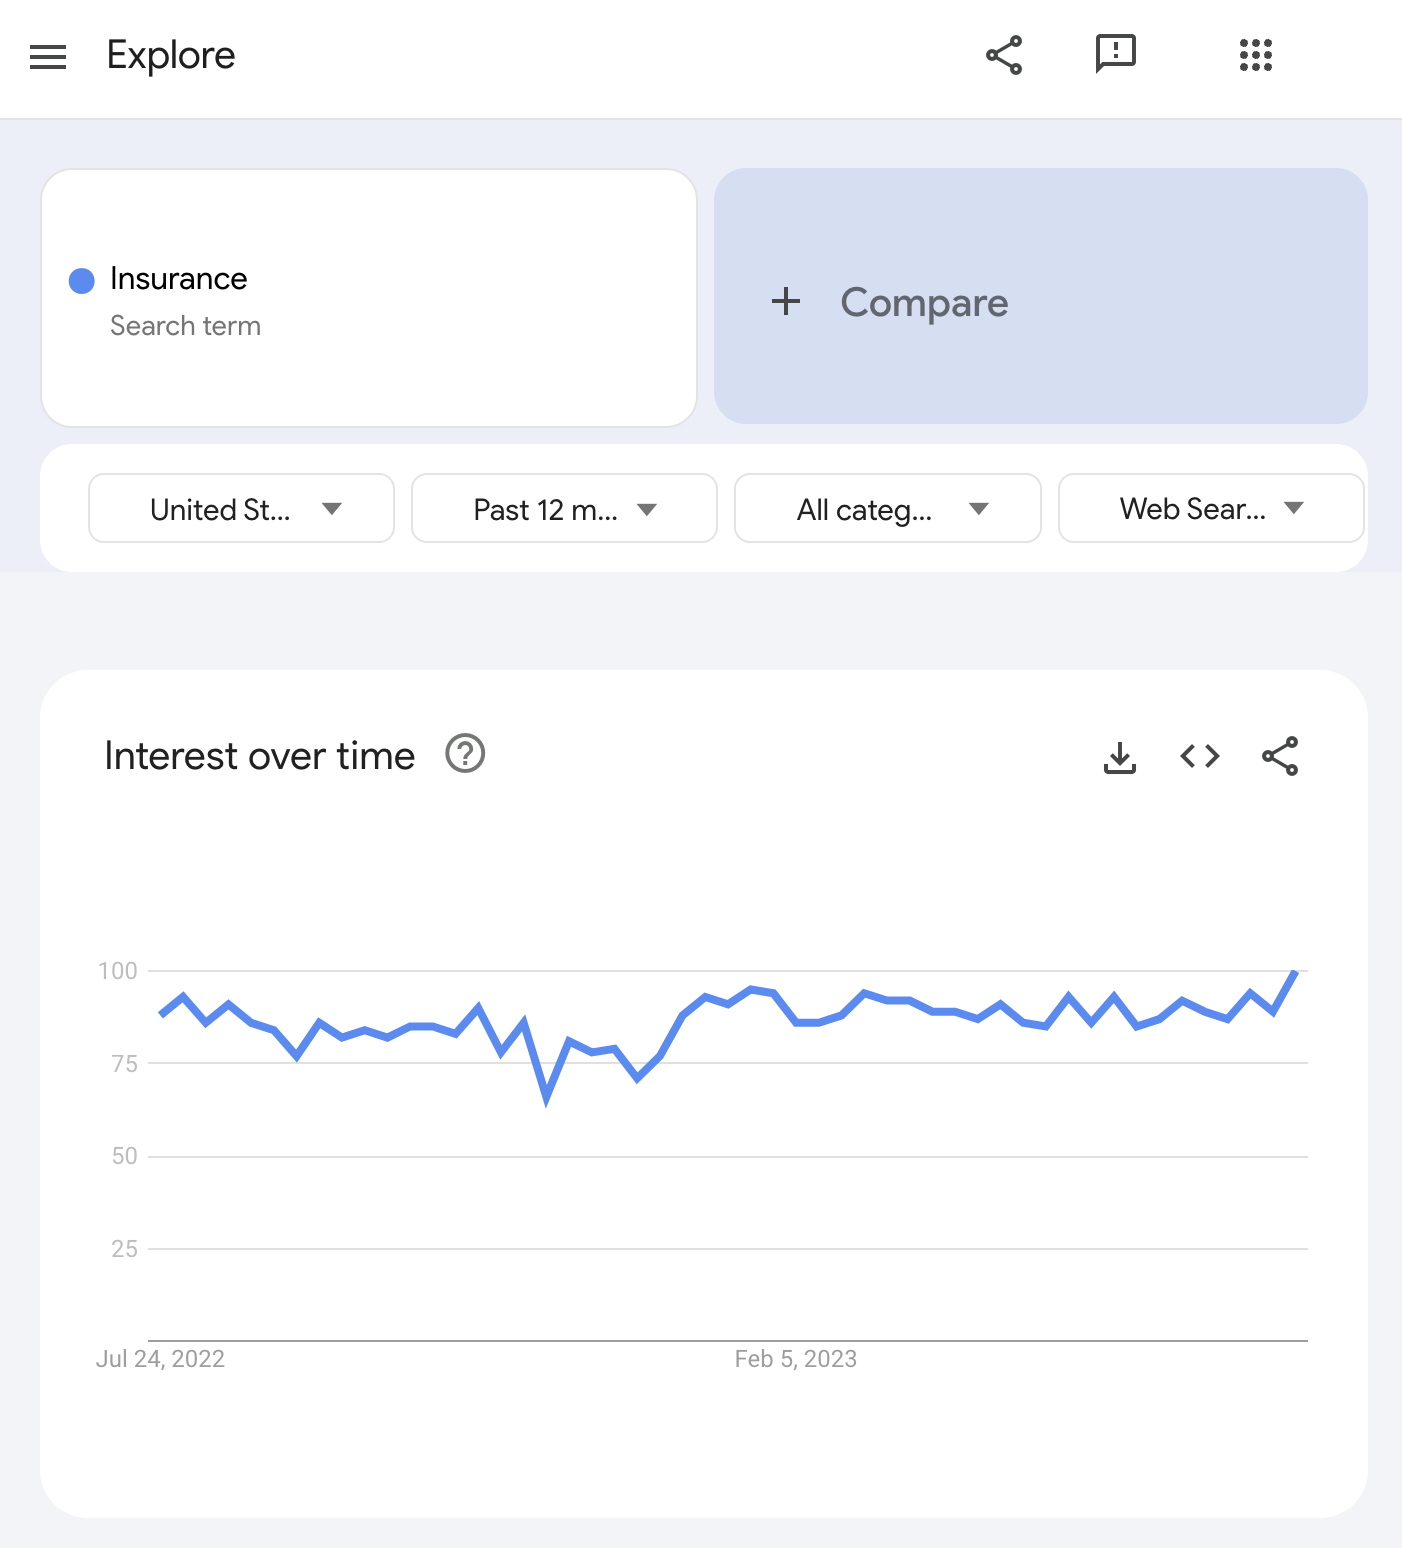 "Interest over time" graph for "insurance" keyword in Google Trends